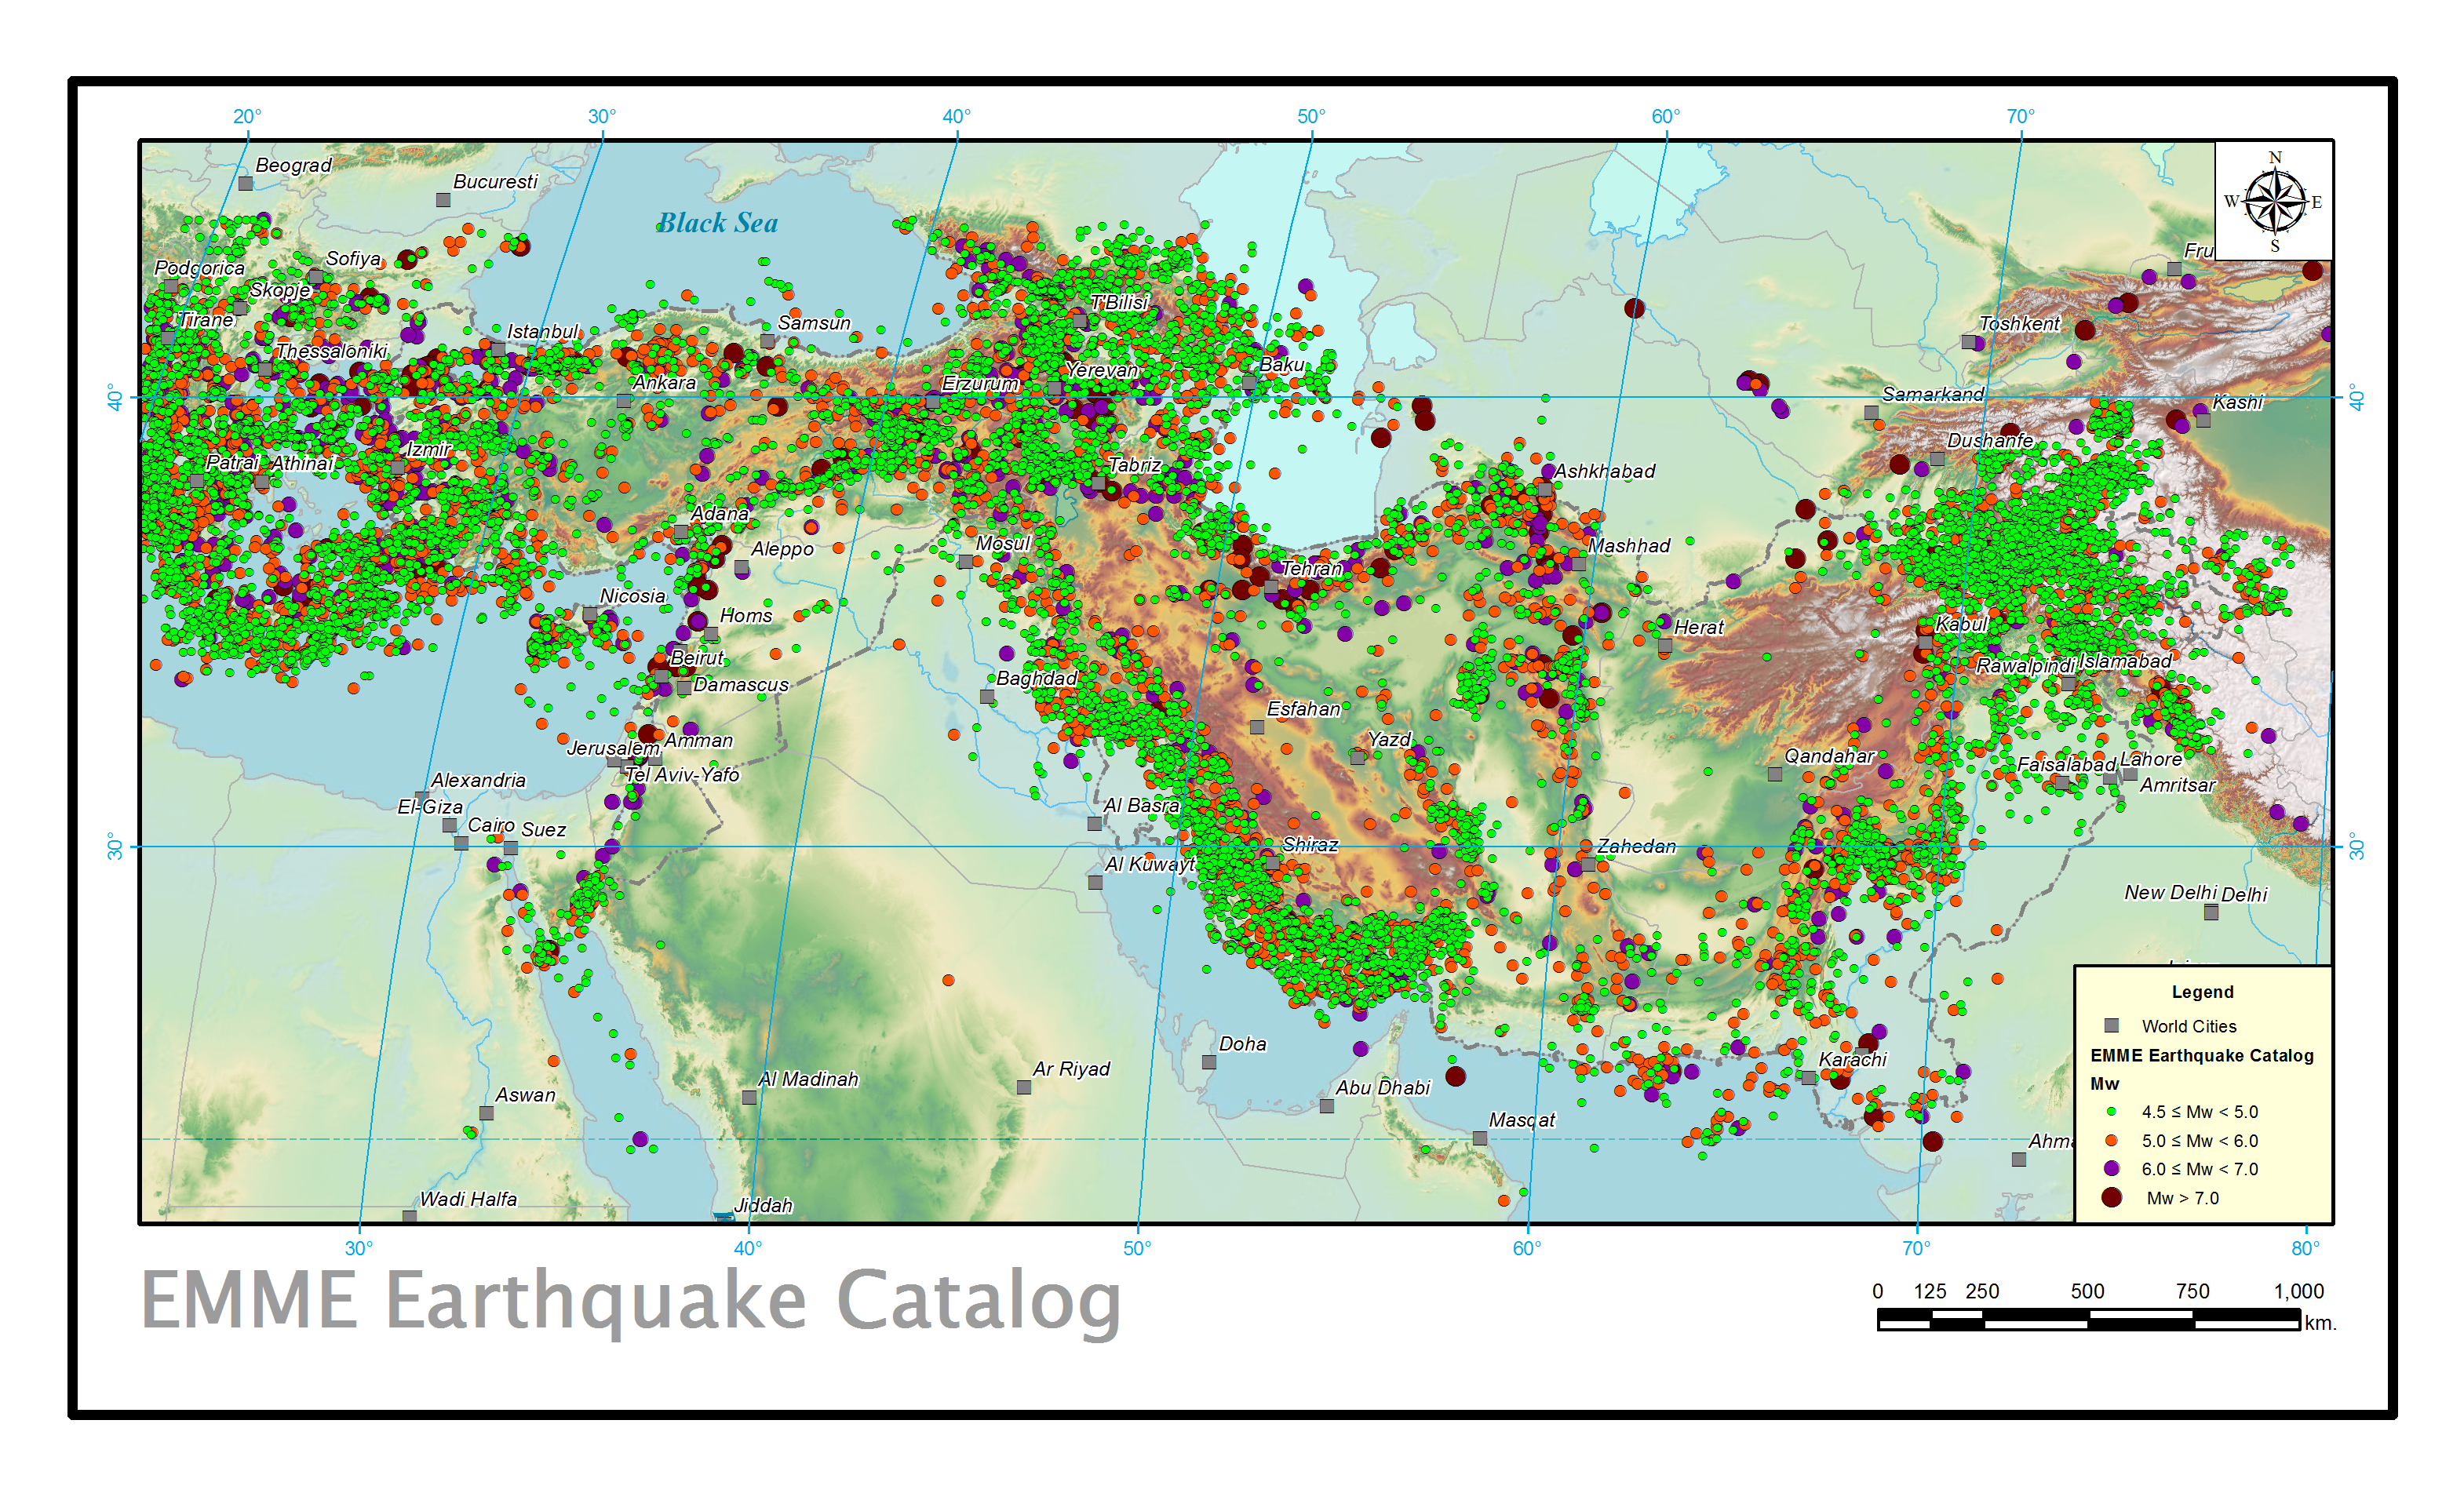 Earthquake Catalogue of the Middle East